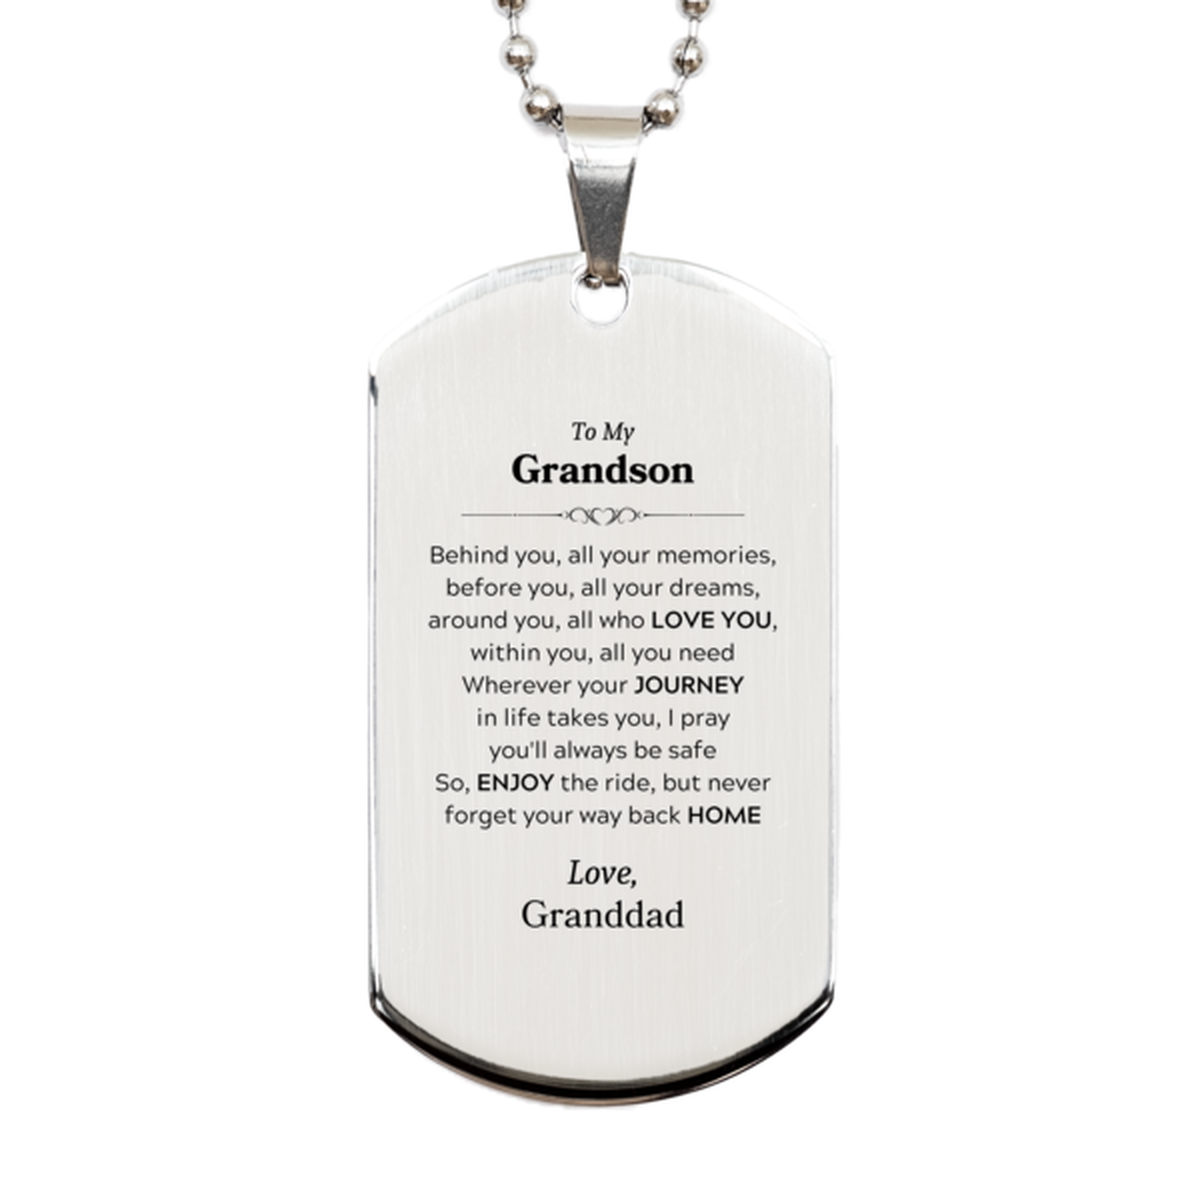 To My Grandson Graduation Gifts from Granddad, Grandson Silver Dog Tag Christmas Birthday Gifts for Grandson Behind you, all your memories, before you, all your dreams. Love, Granddad